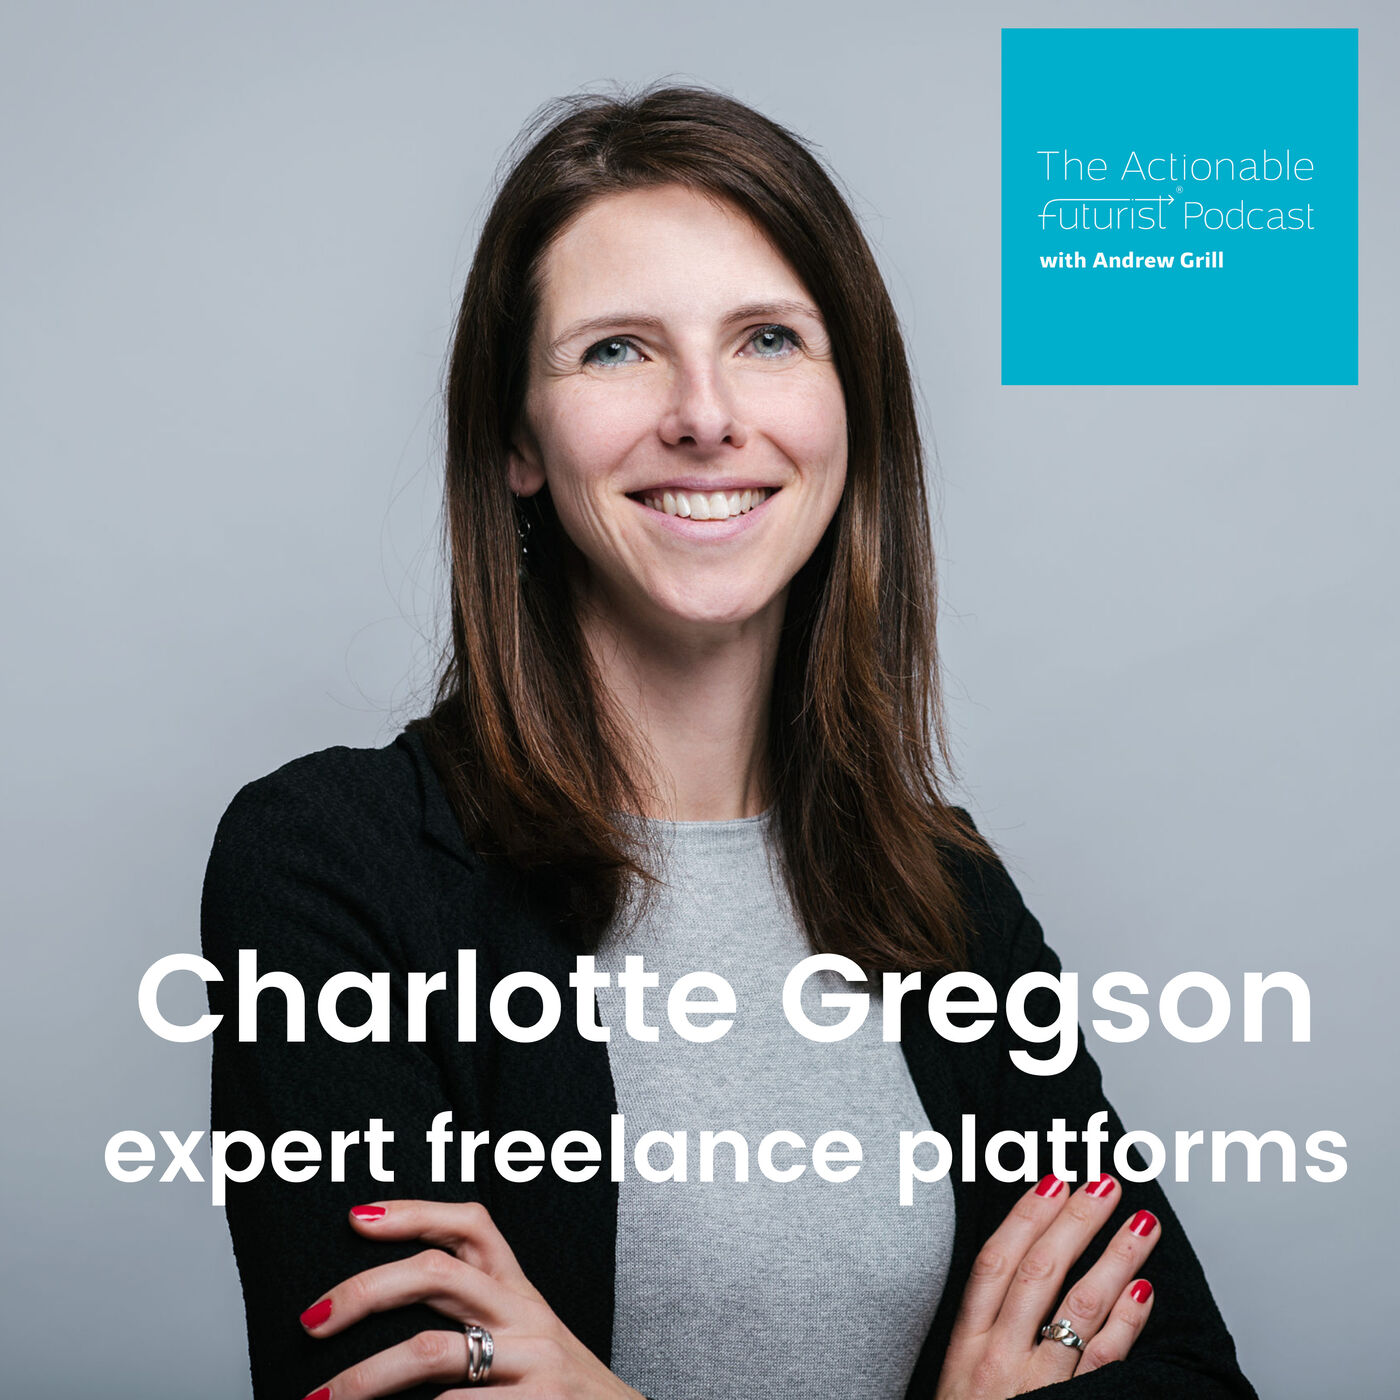 S4 Episode 12: Charlotte Gregson from Malt on the role of expert freelance platforms